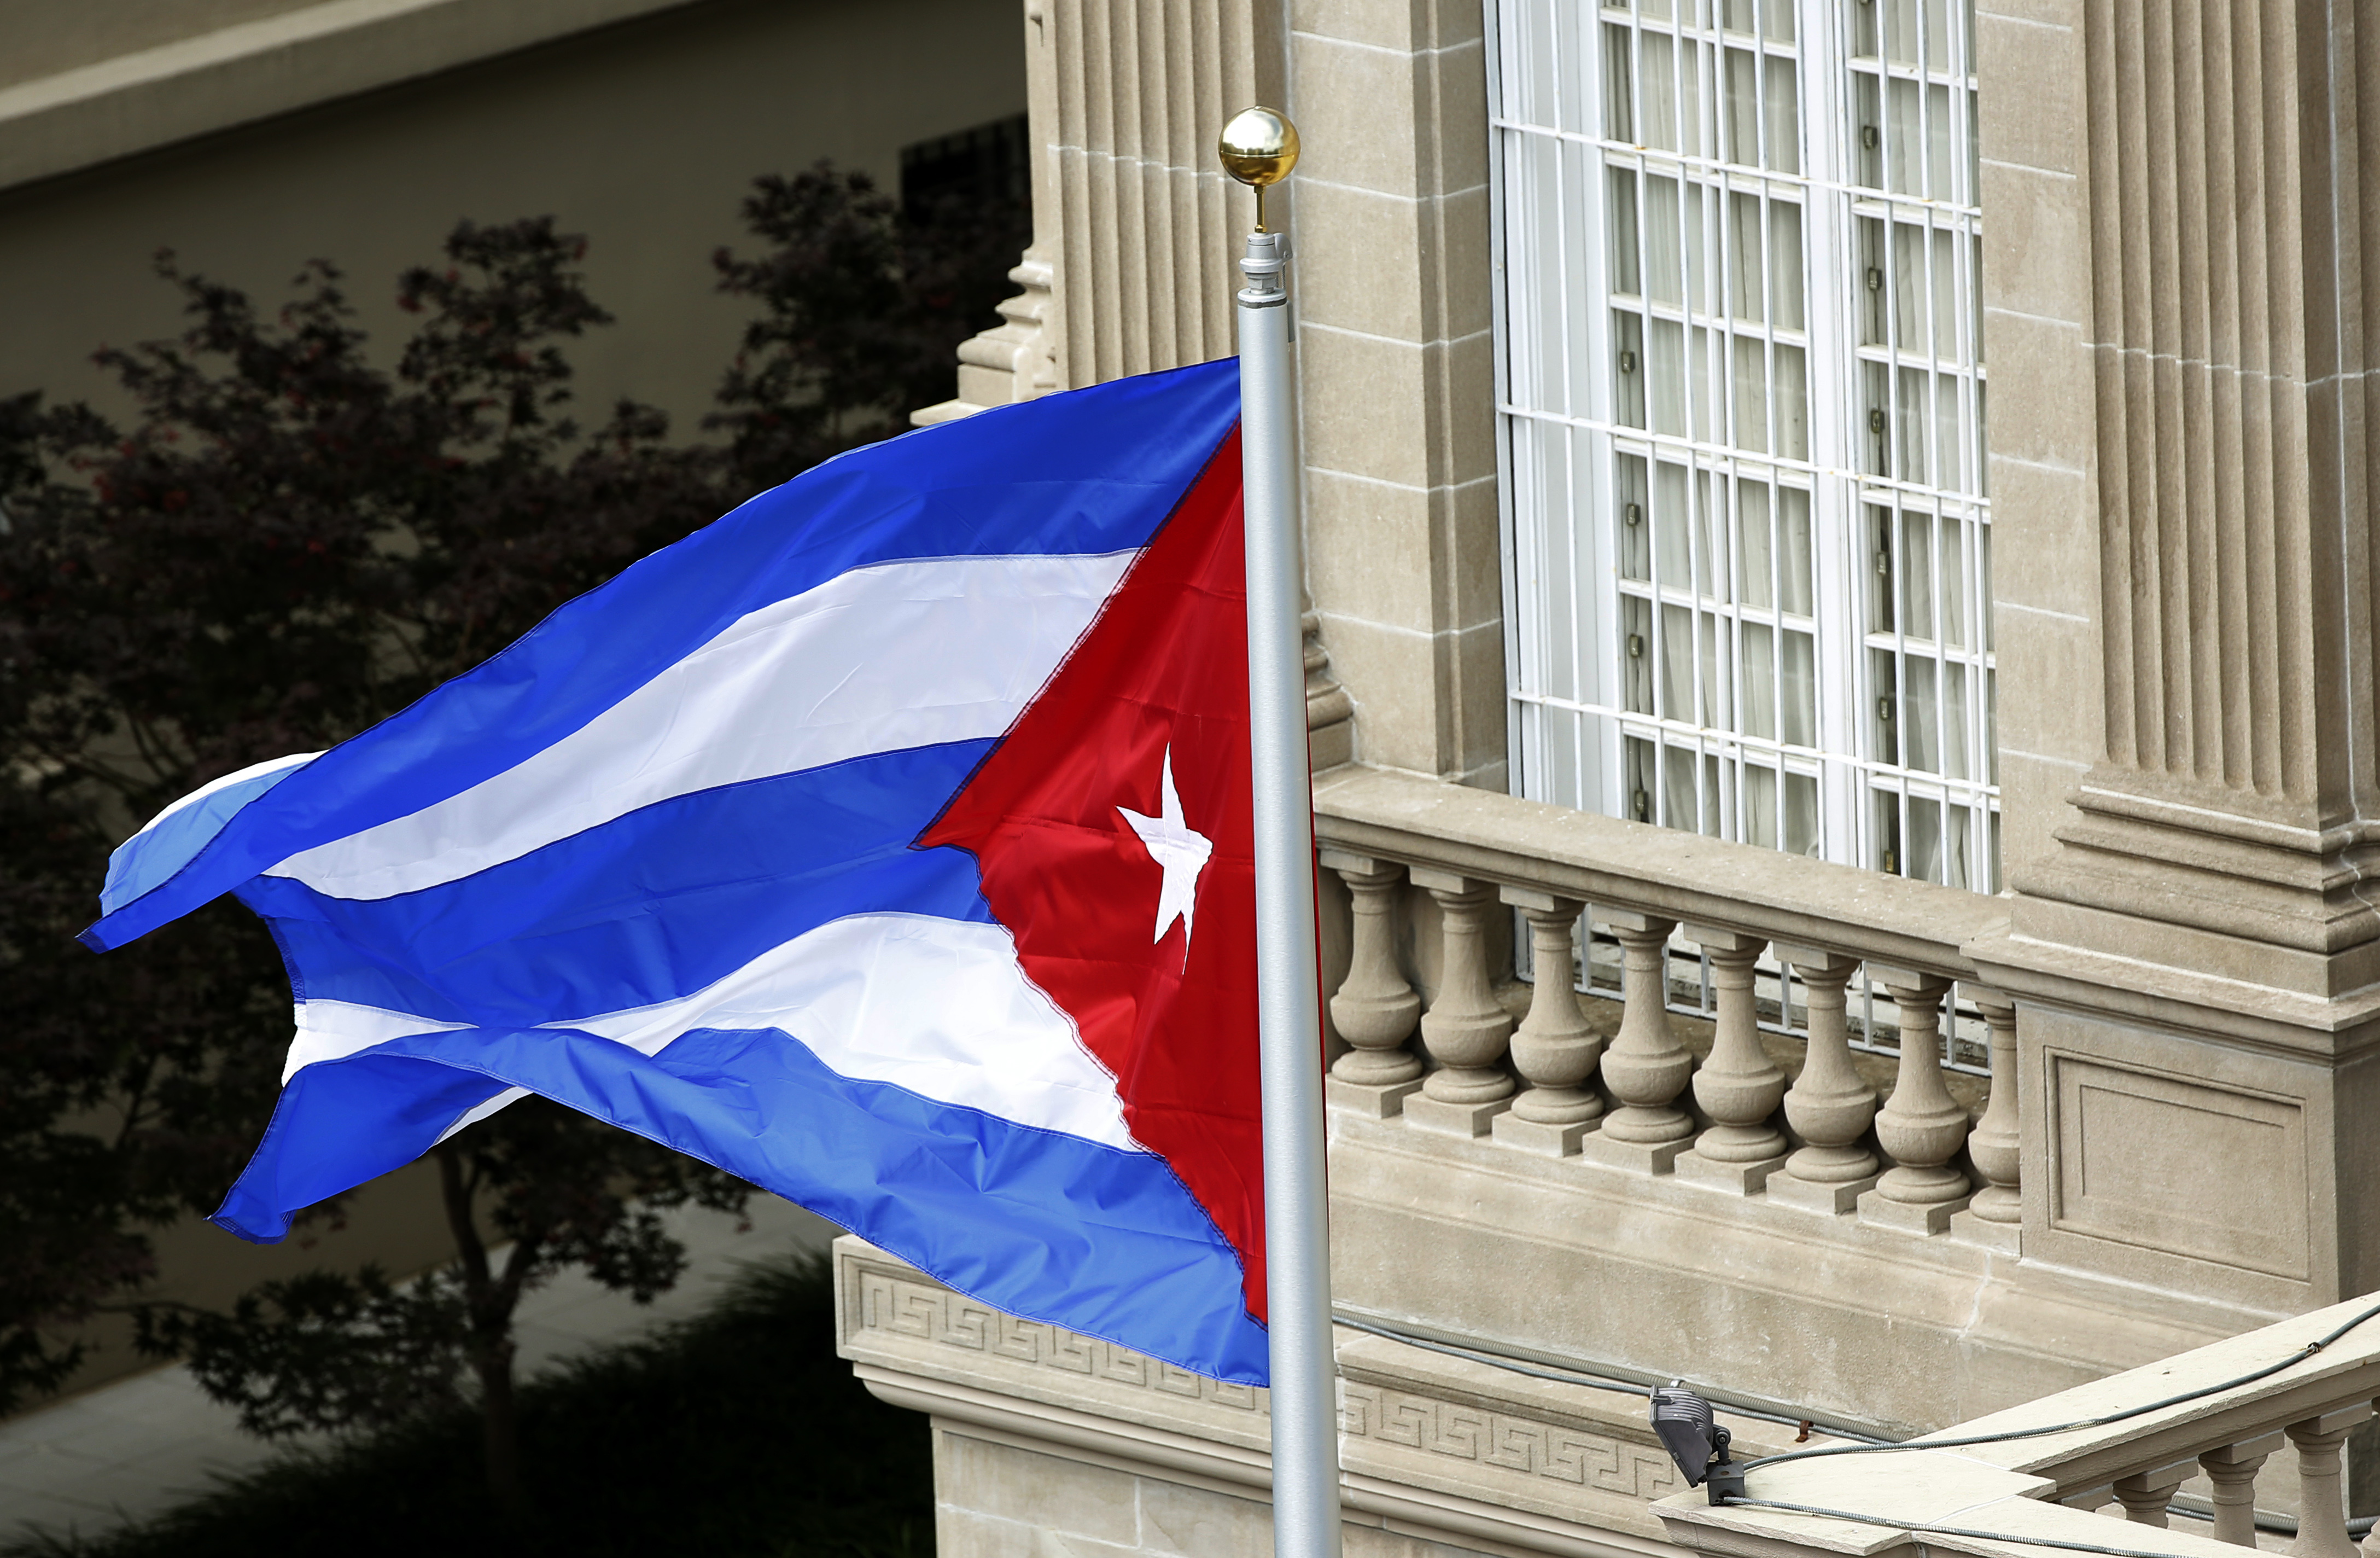 Cuban flag flutters in wind after being raised at embassy in Washington